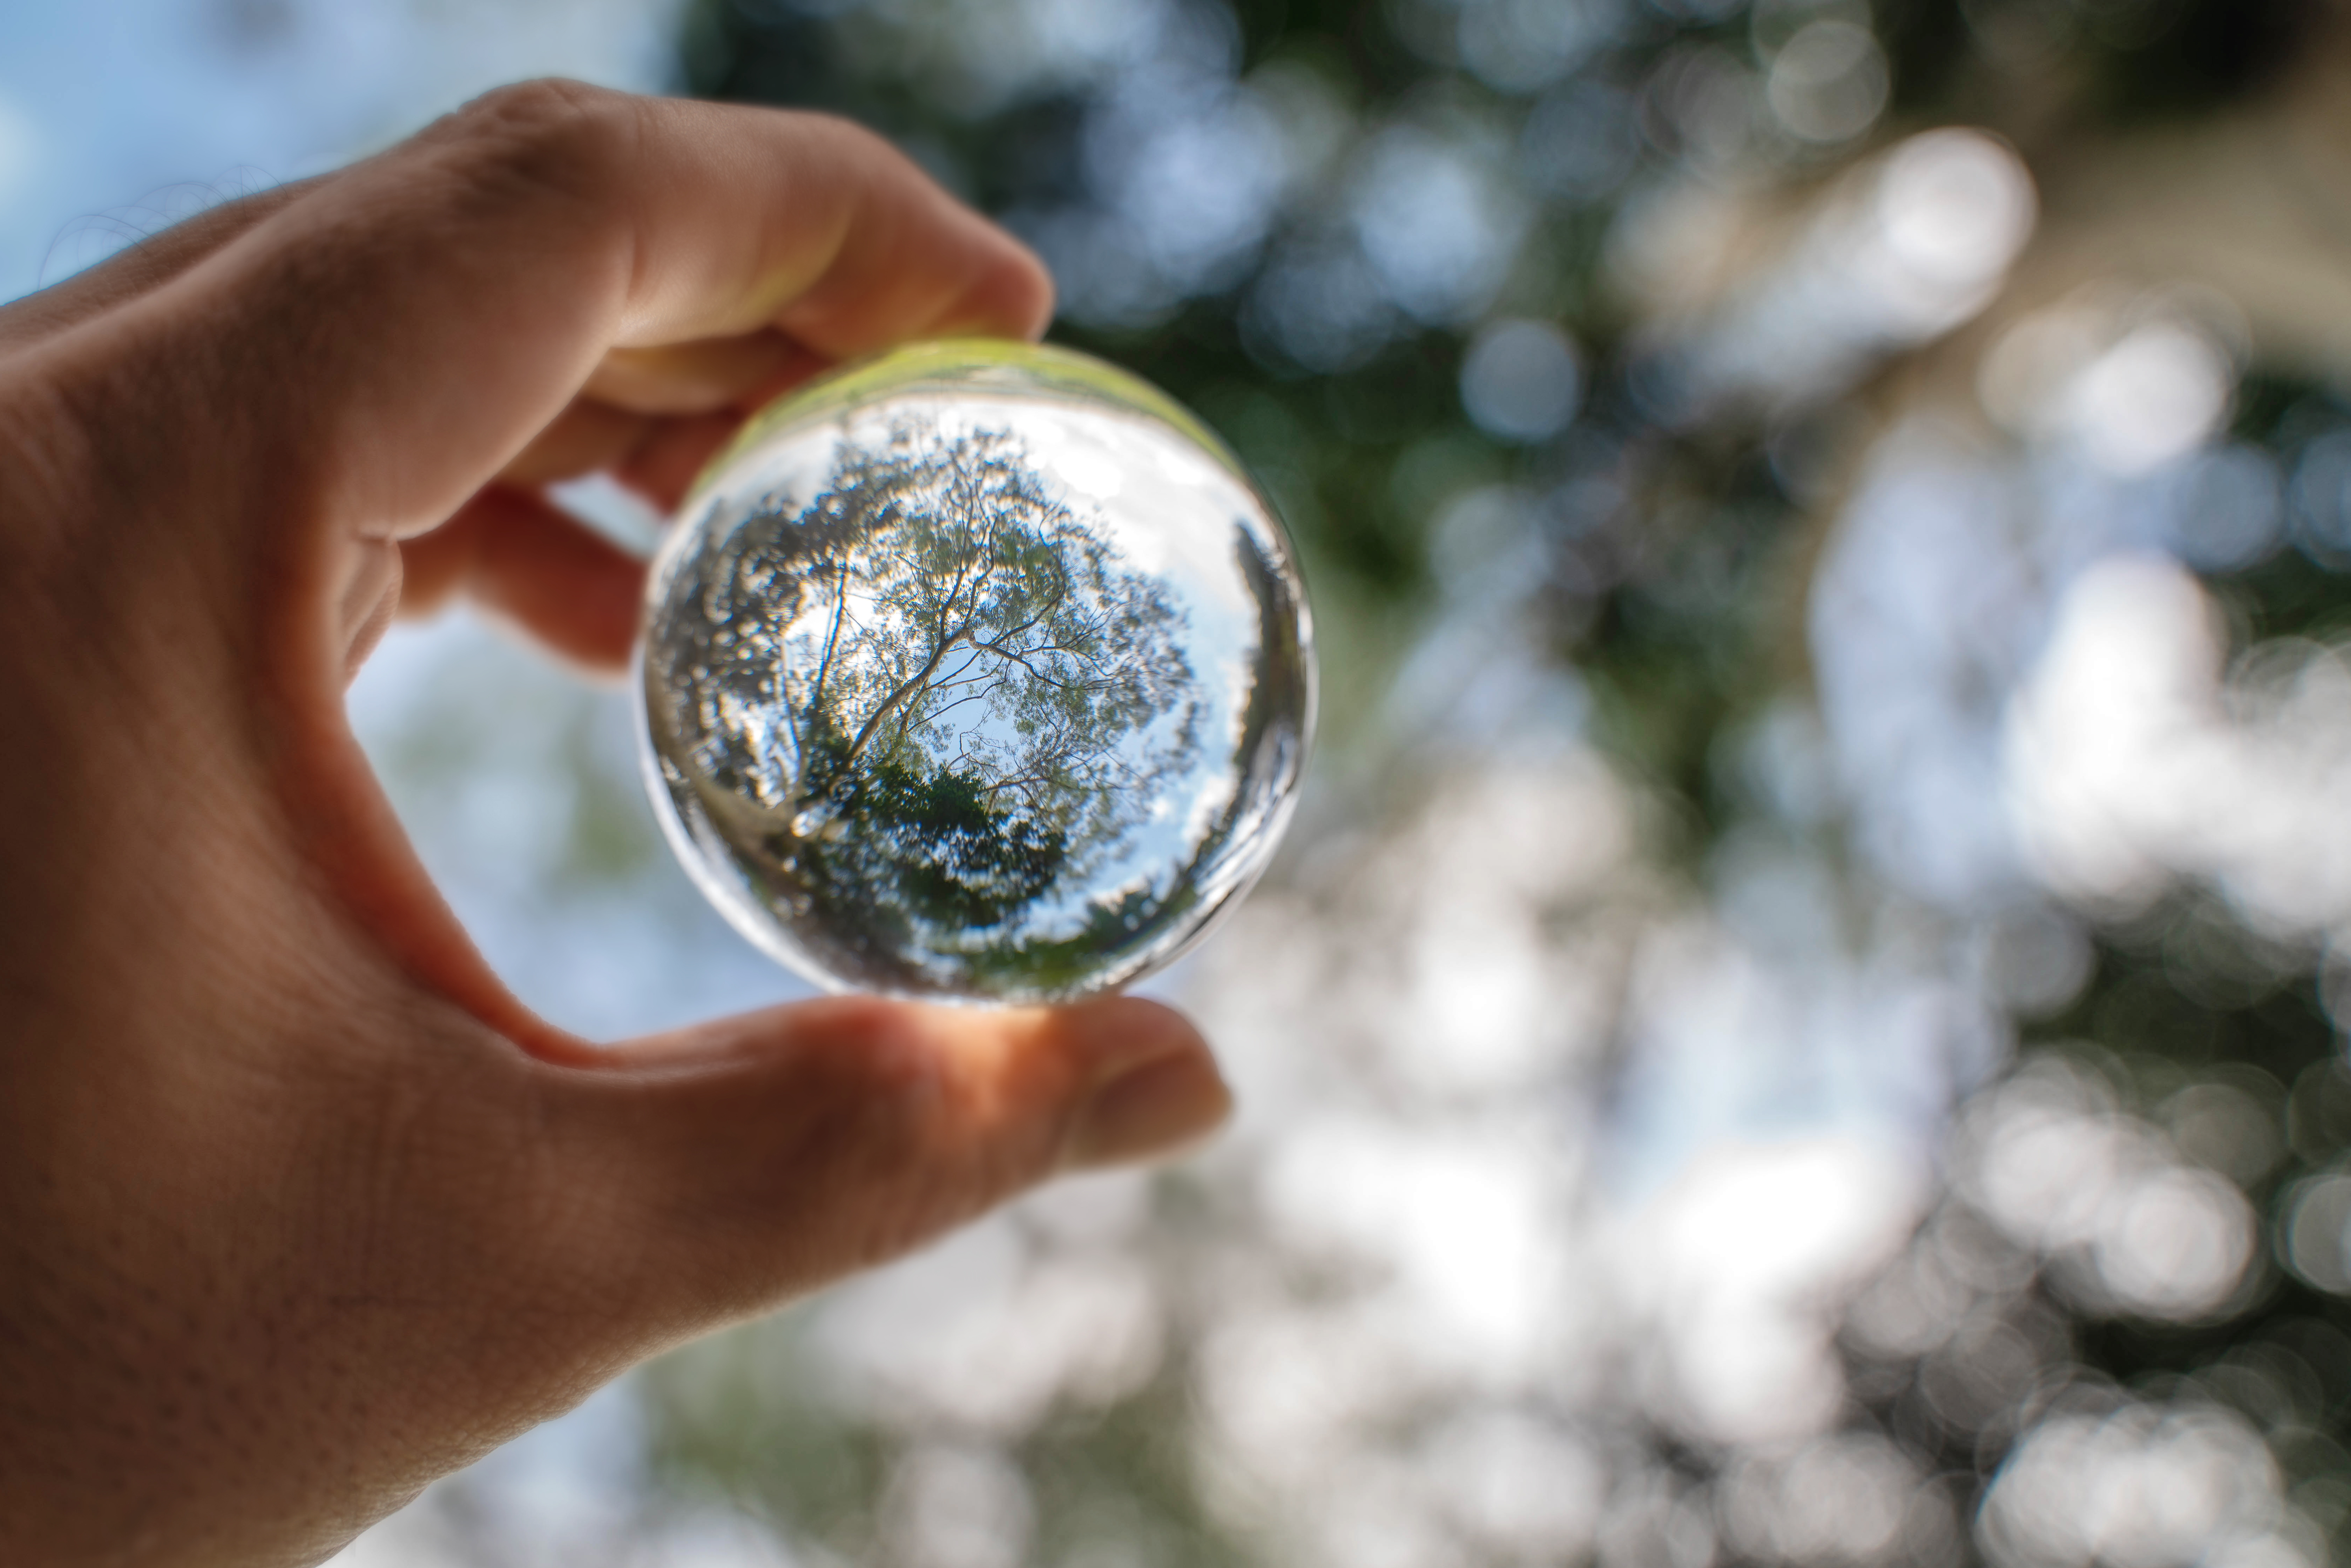 A hand holding a clear ball that is reflecting the trees